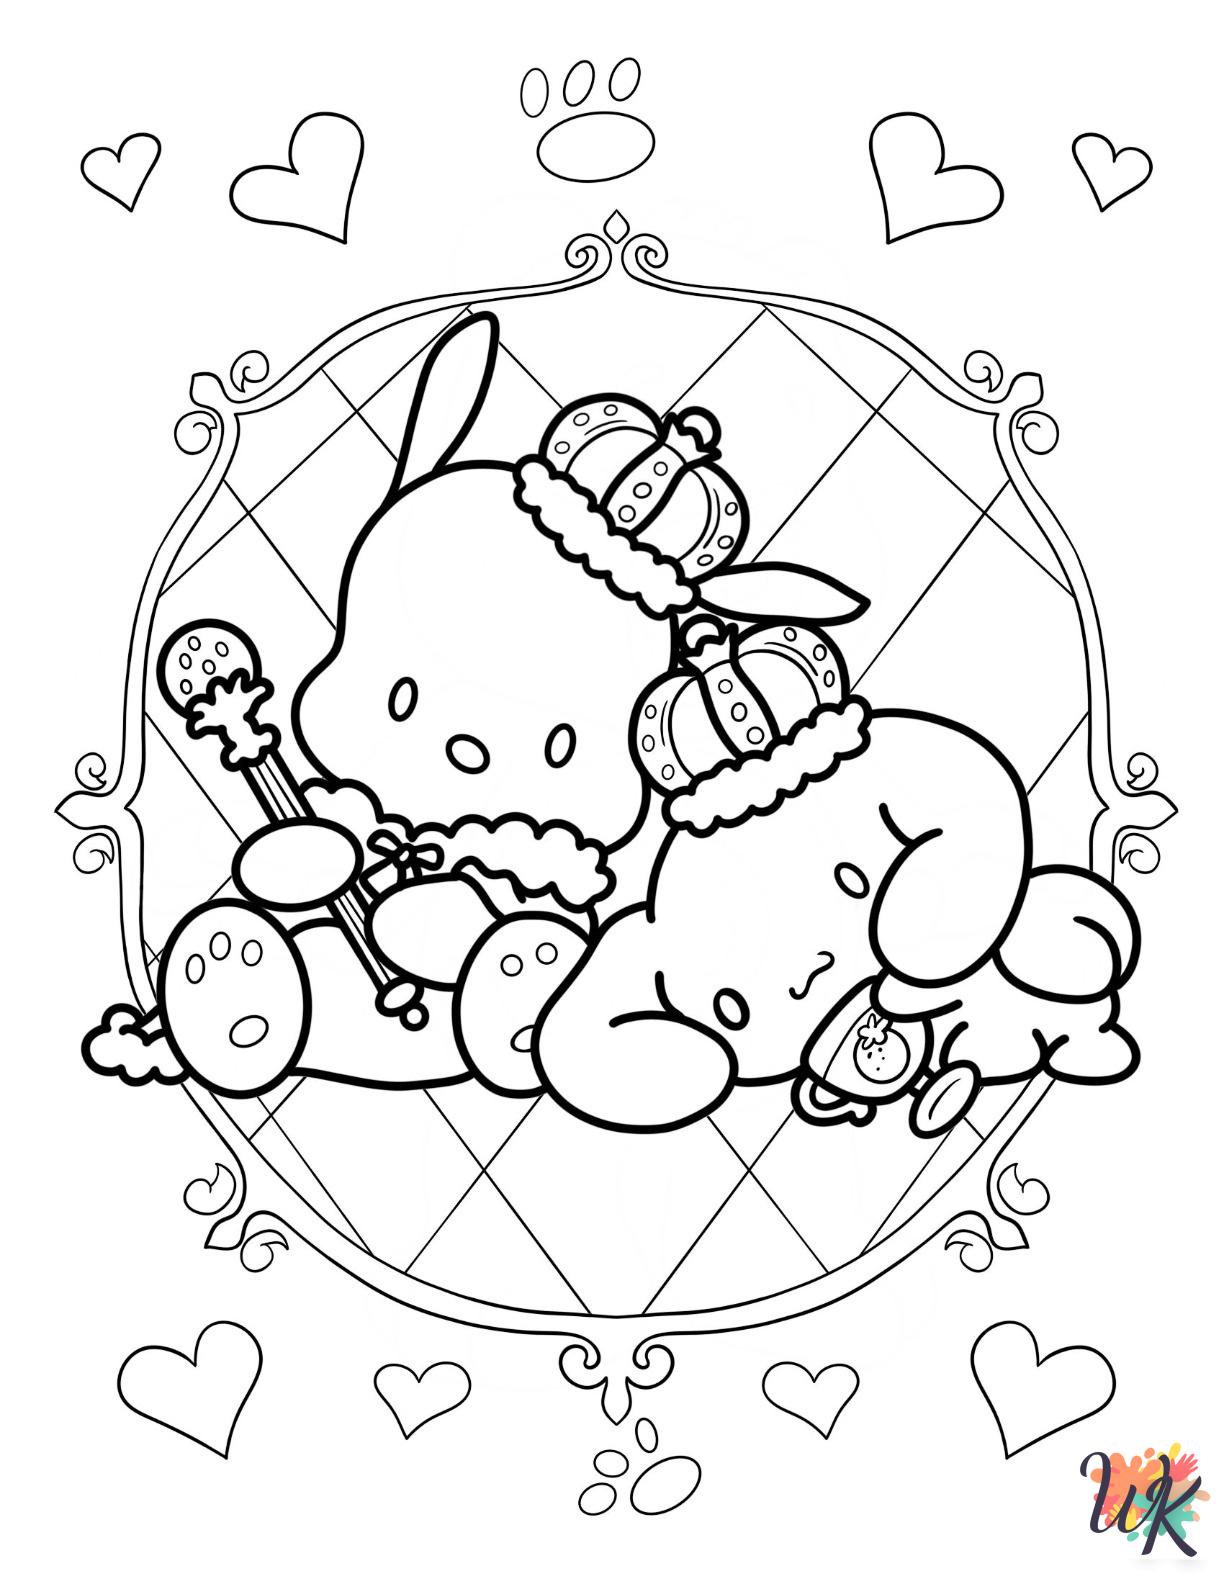 Pochacco coloring pages to print